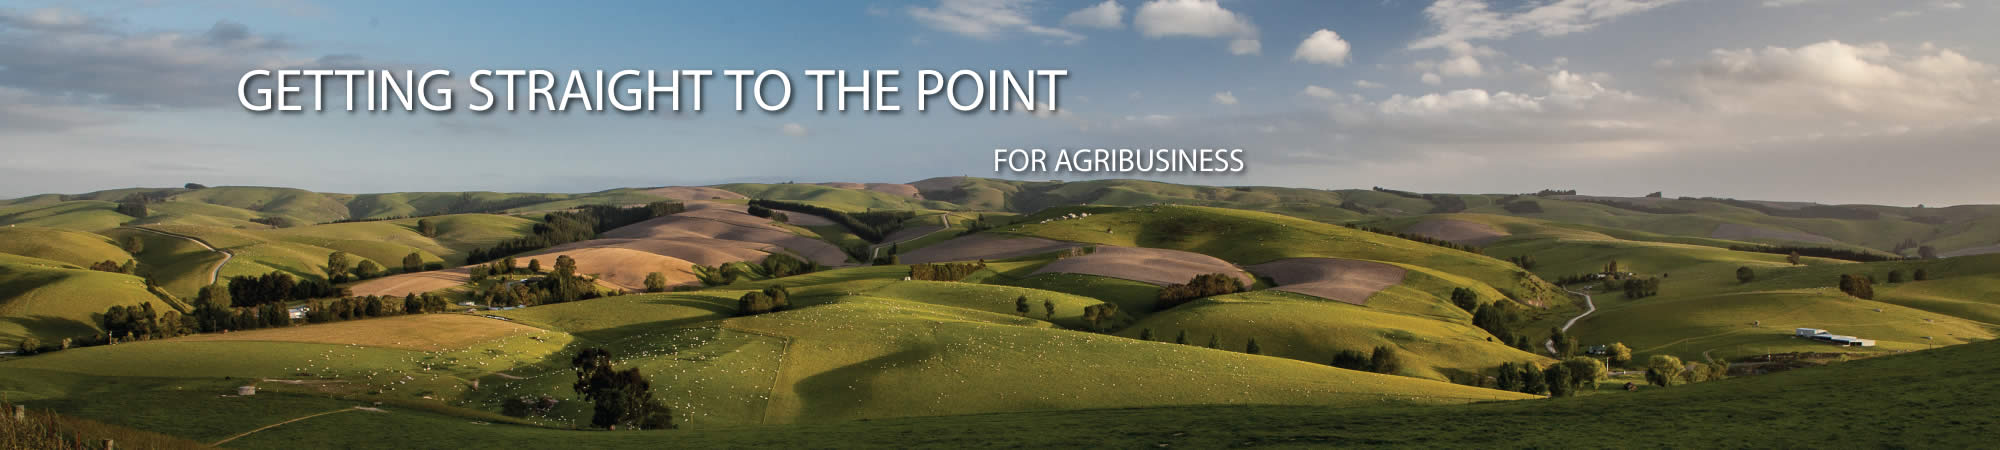 Getting straight for agribusiness